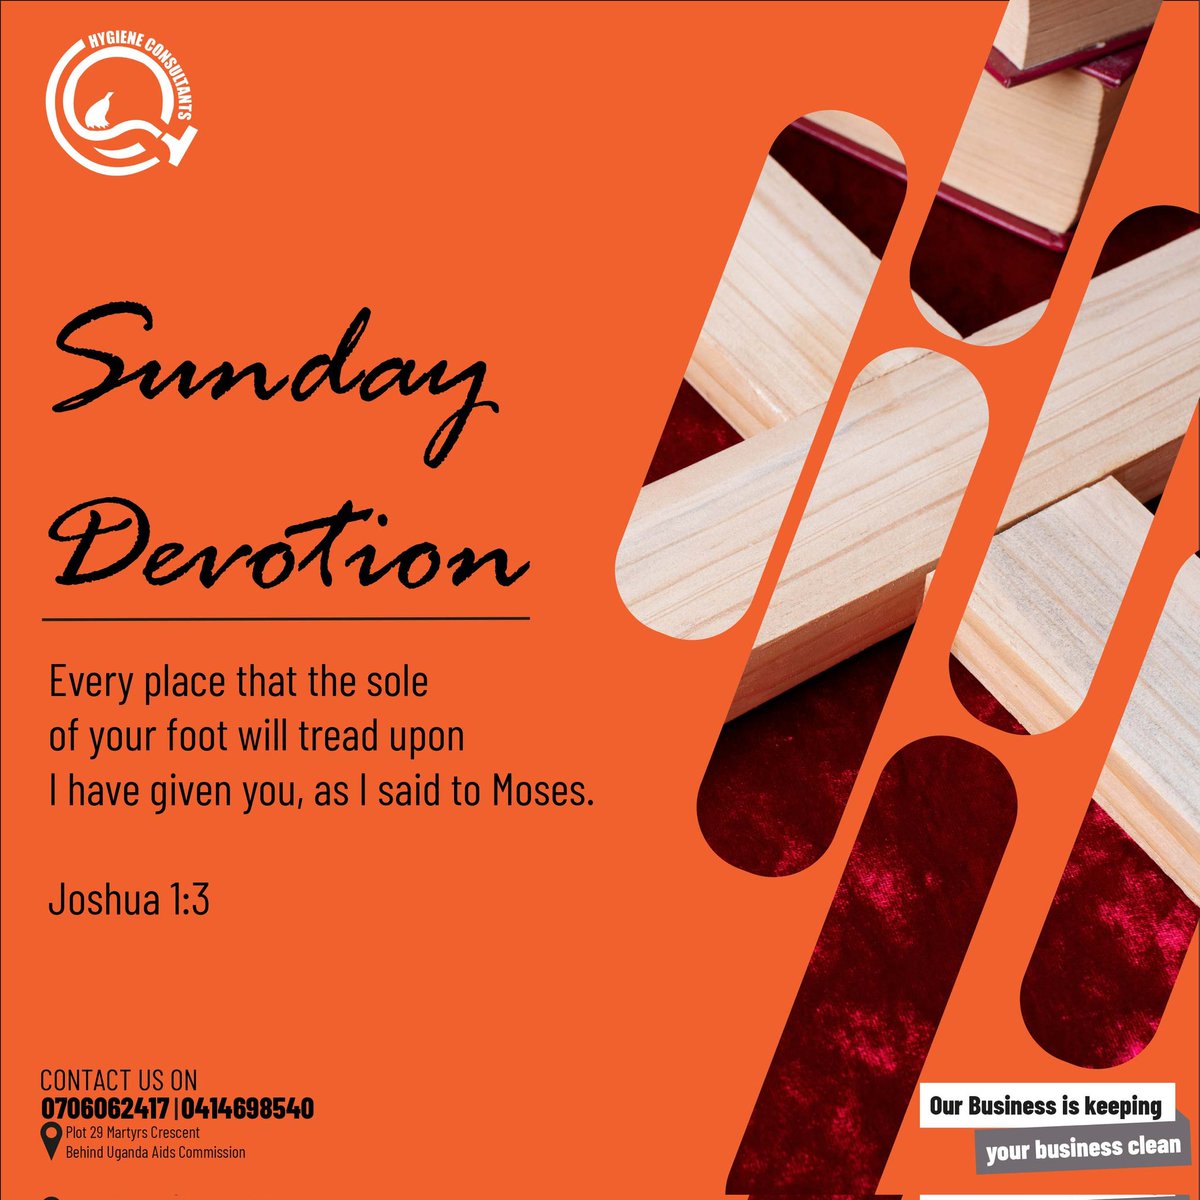 To all our dear Customers, have a blessed Sunday.
#SundayDevotion